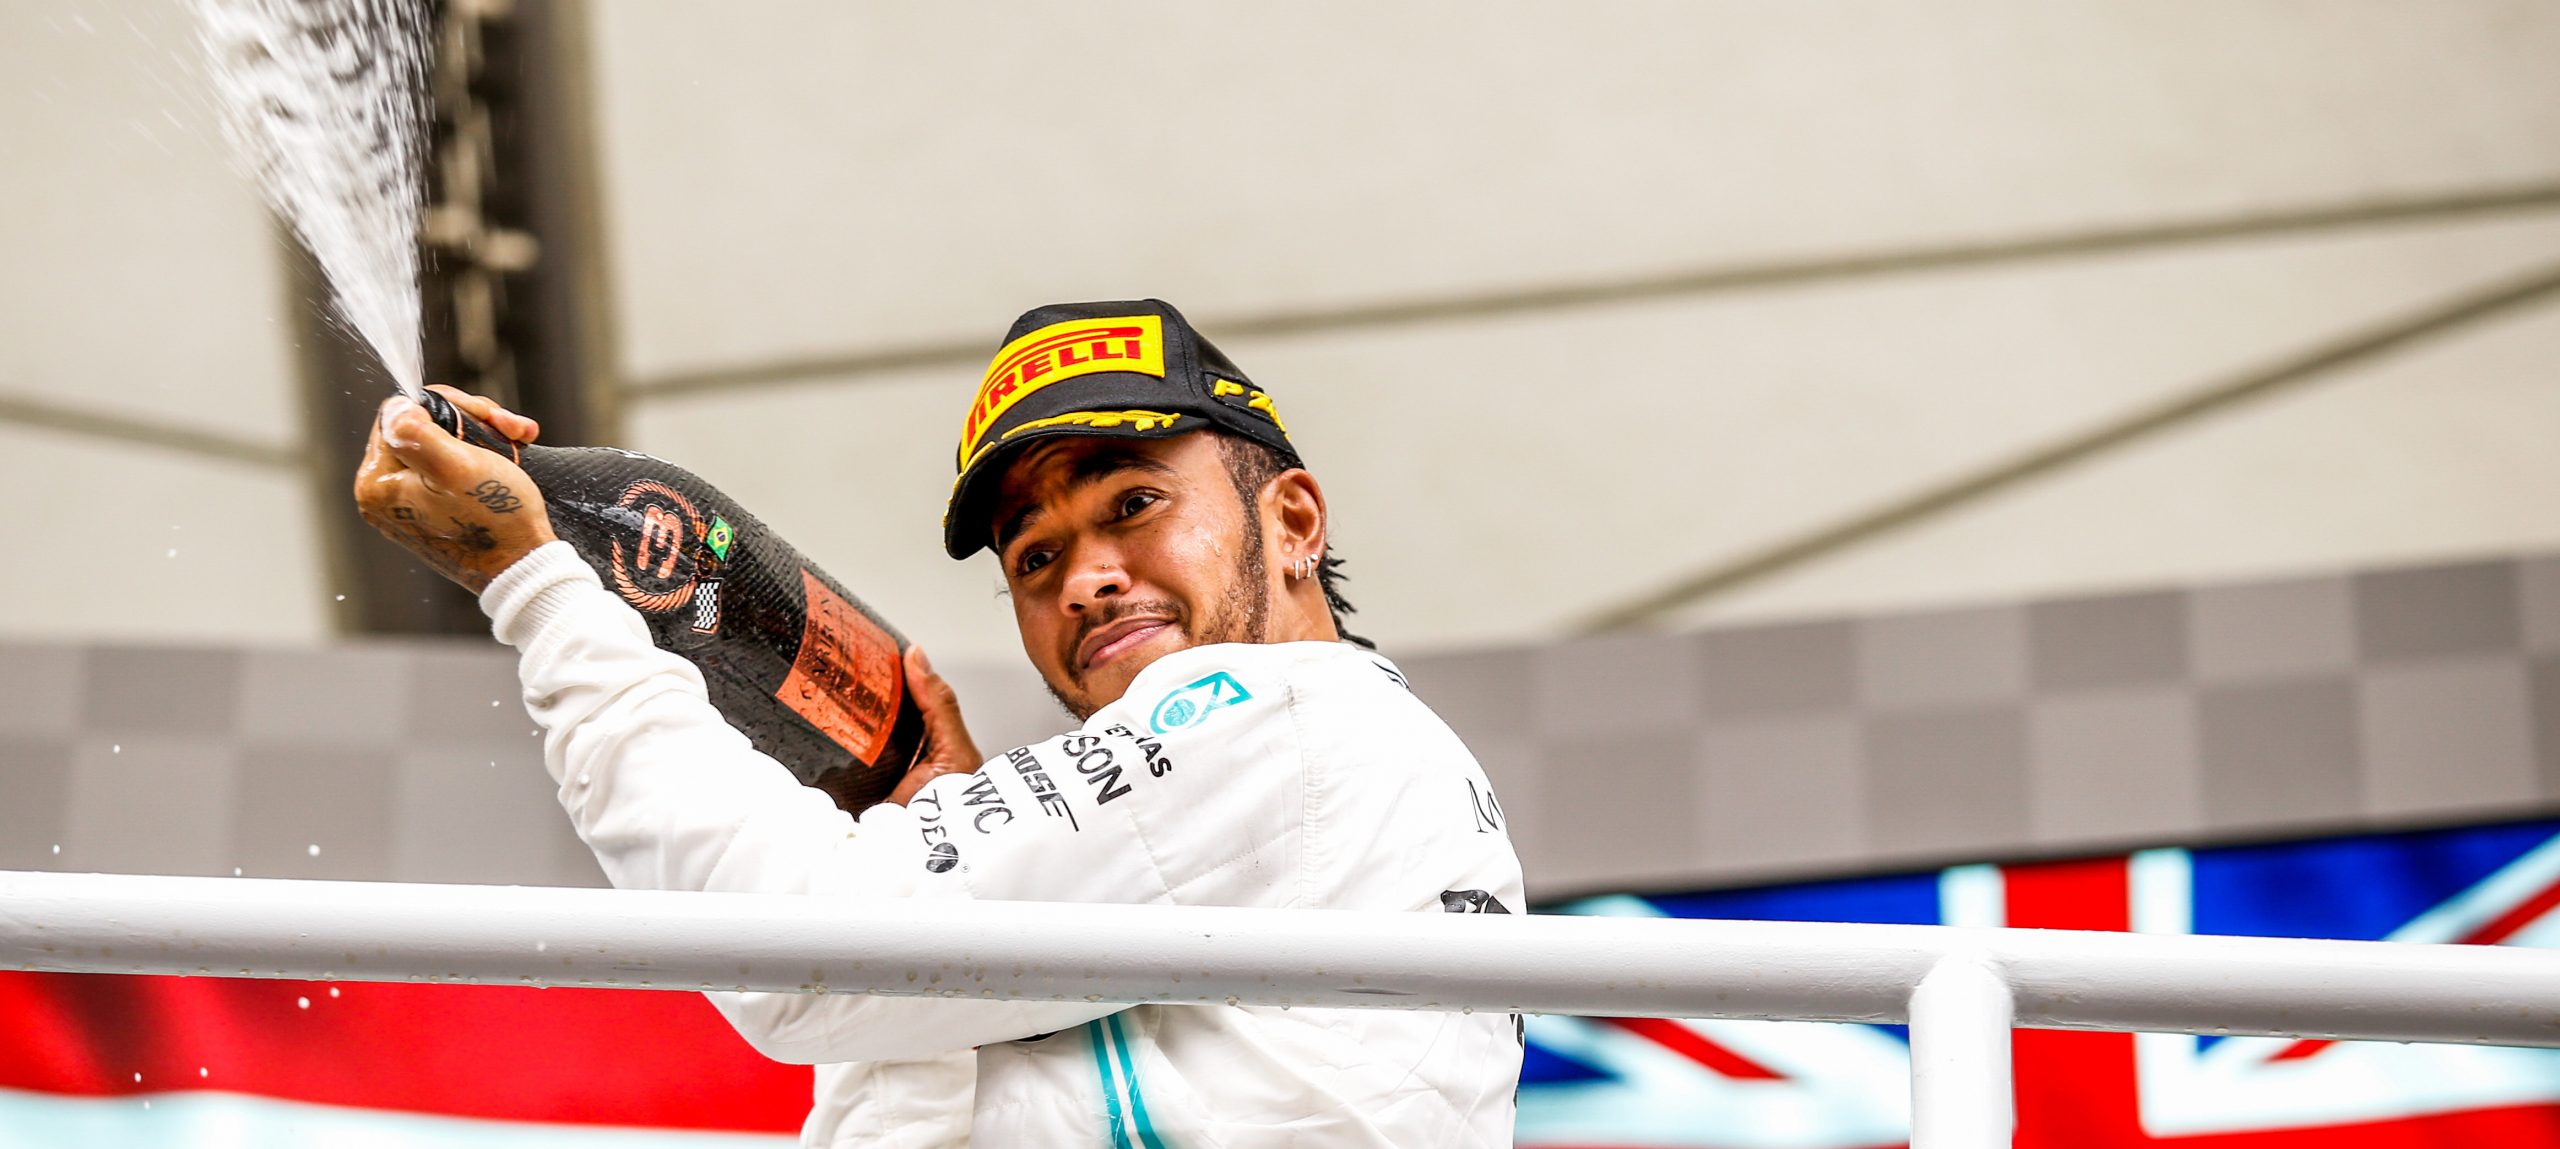 Mercedes-AMG Petronas Formula One Team's Lewis Hamilton wants to become Formula One World Champions for the 7th time in his career.